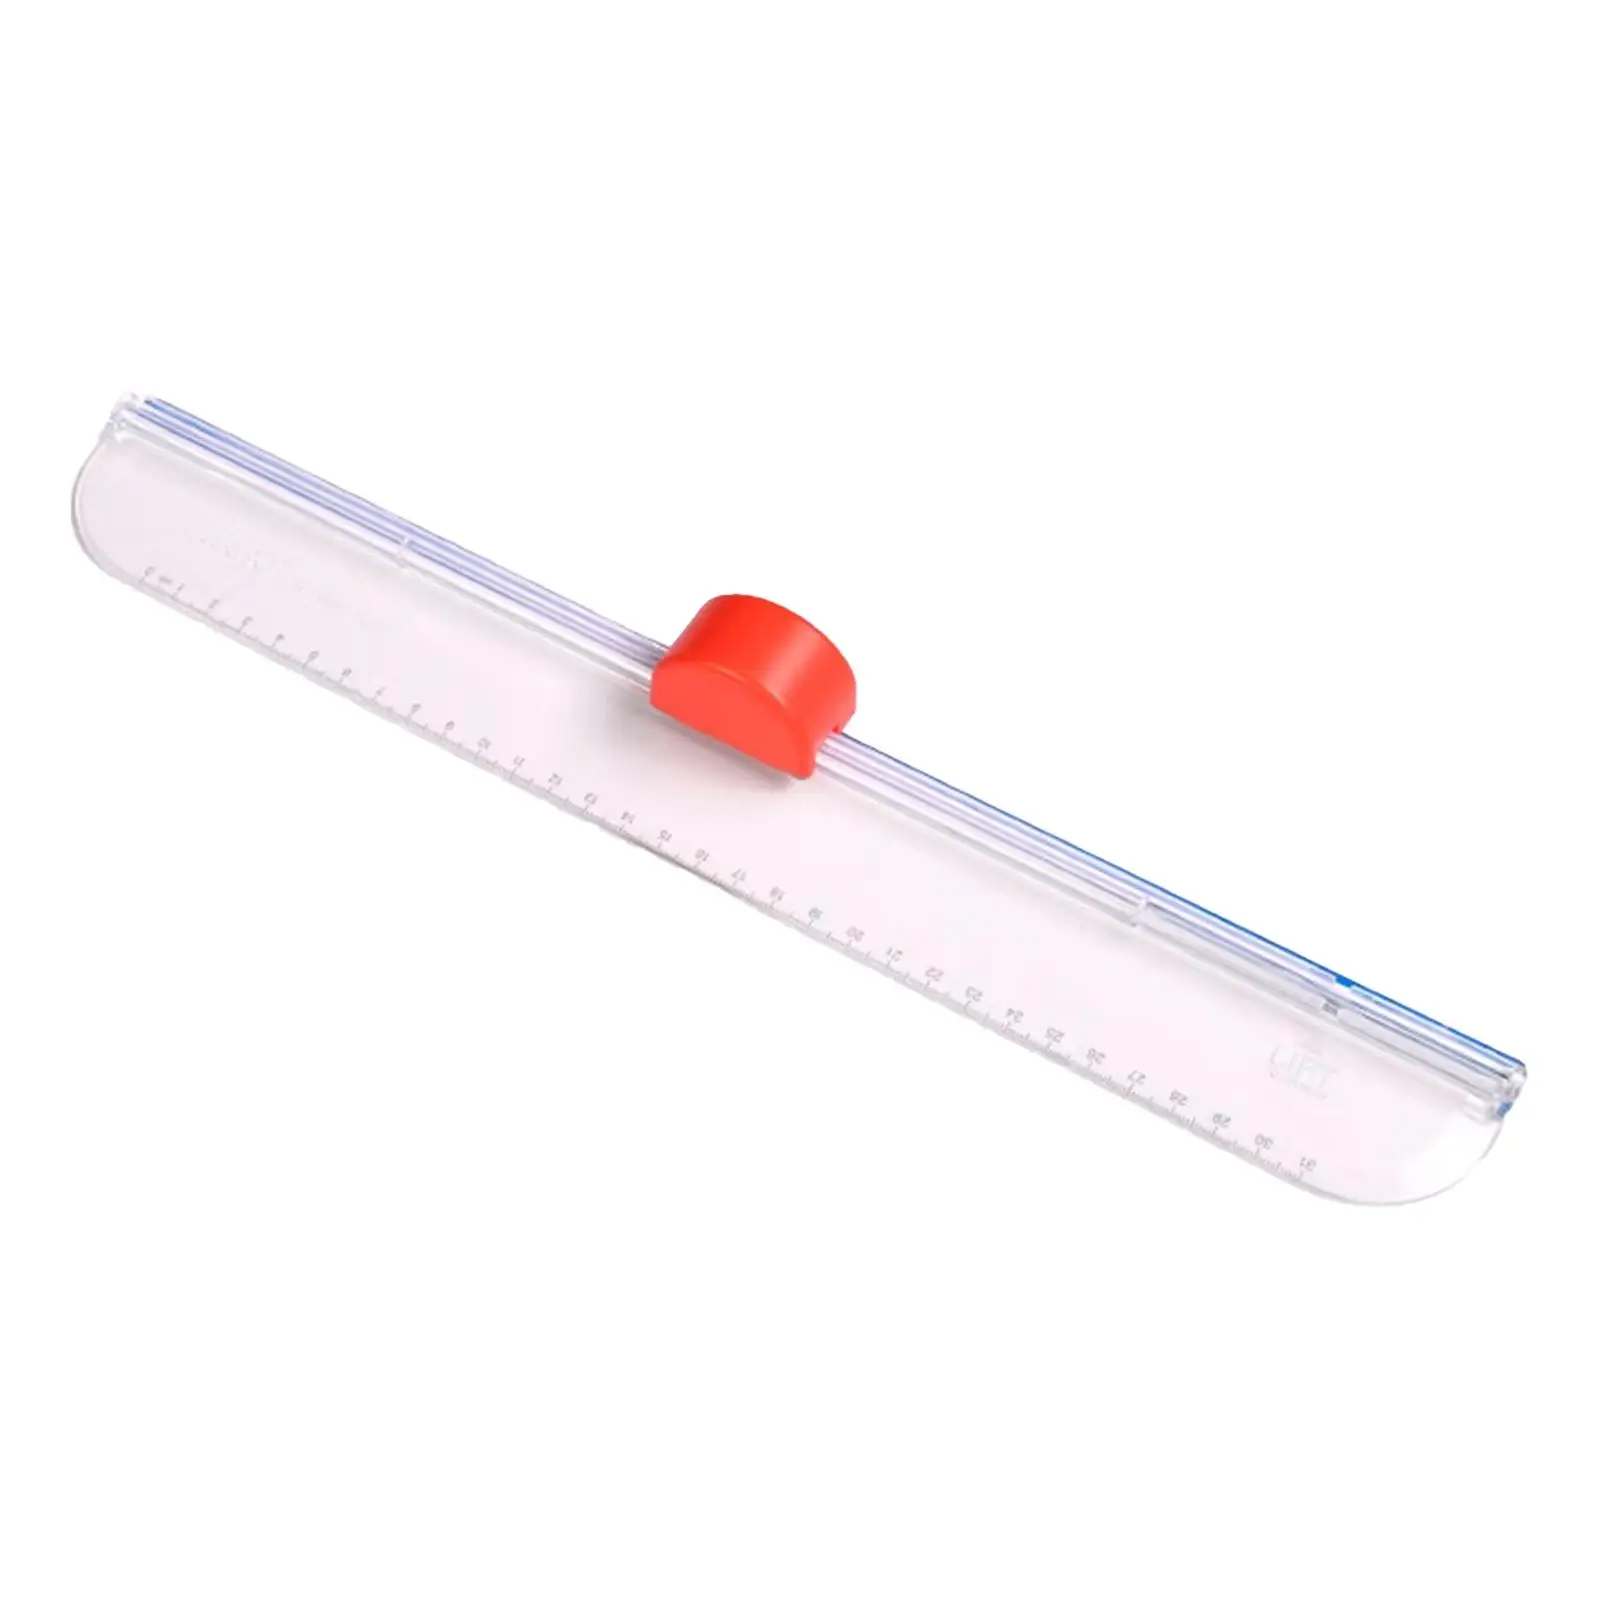 Small Paper Cutter Paper Cutting Machine Straight Line Precision Reusable Ruler Paper Trimmer for Envelopes Invitation Cards